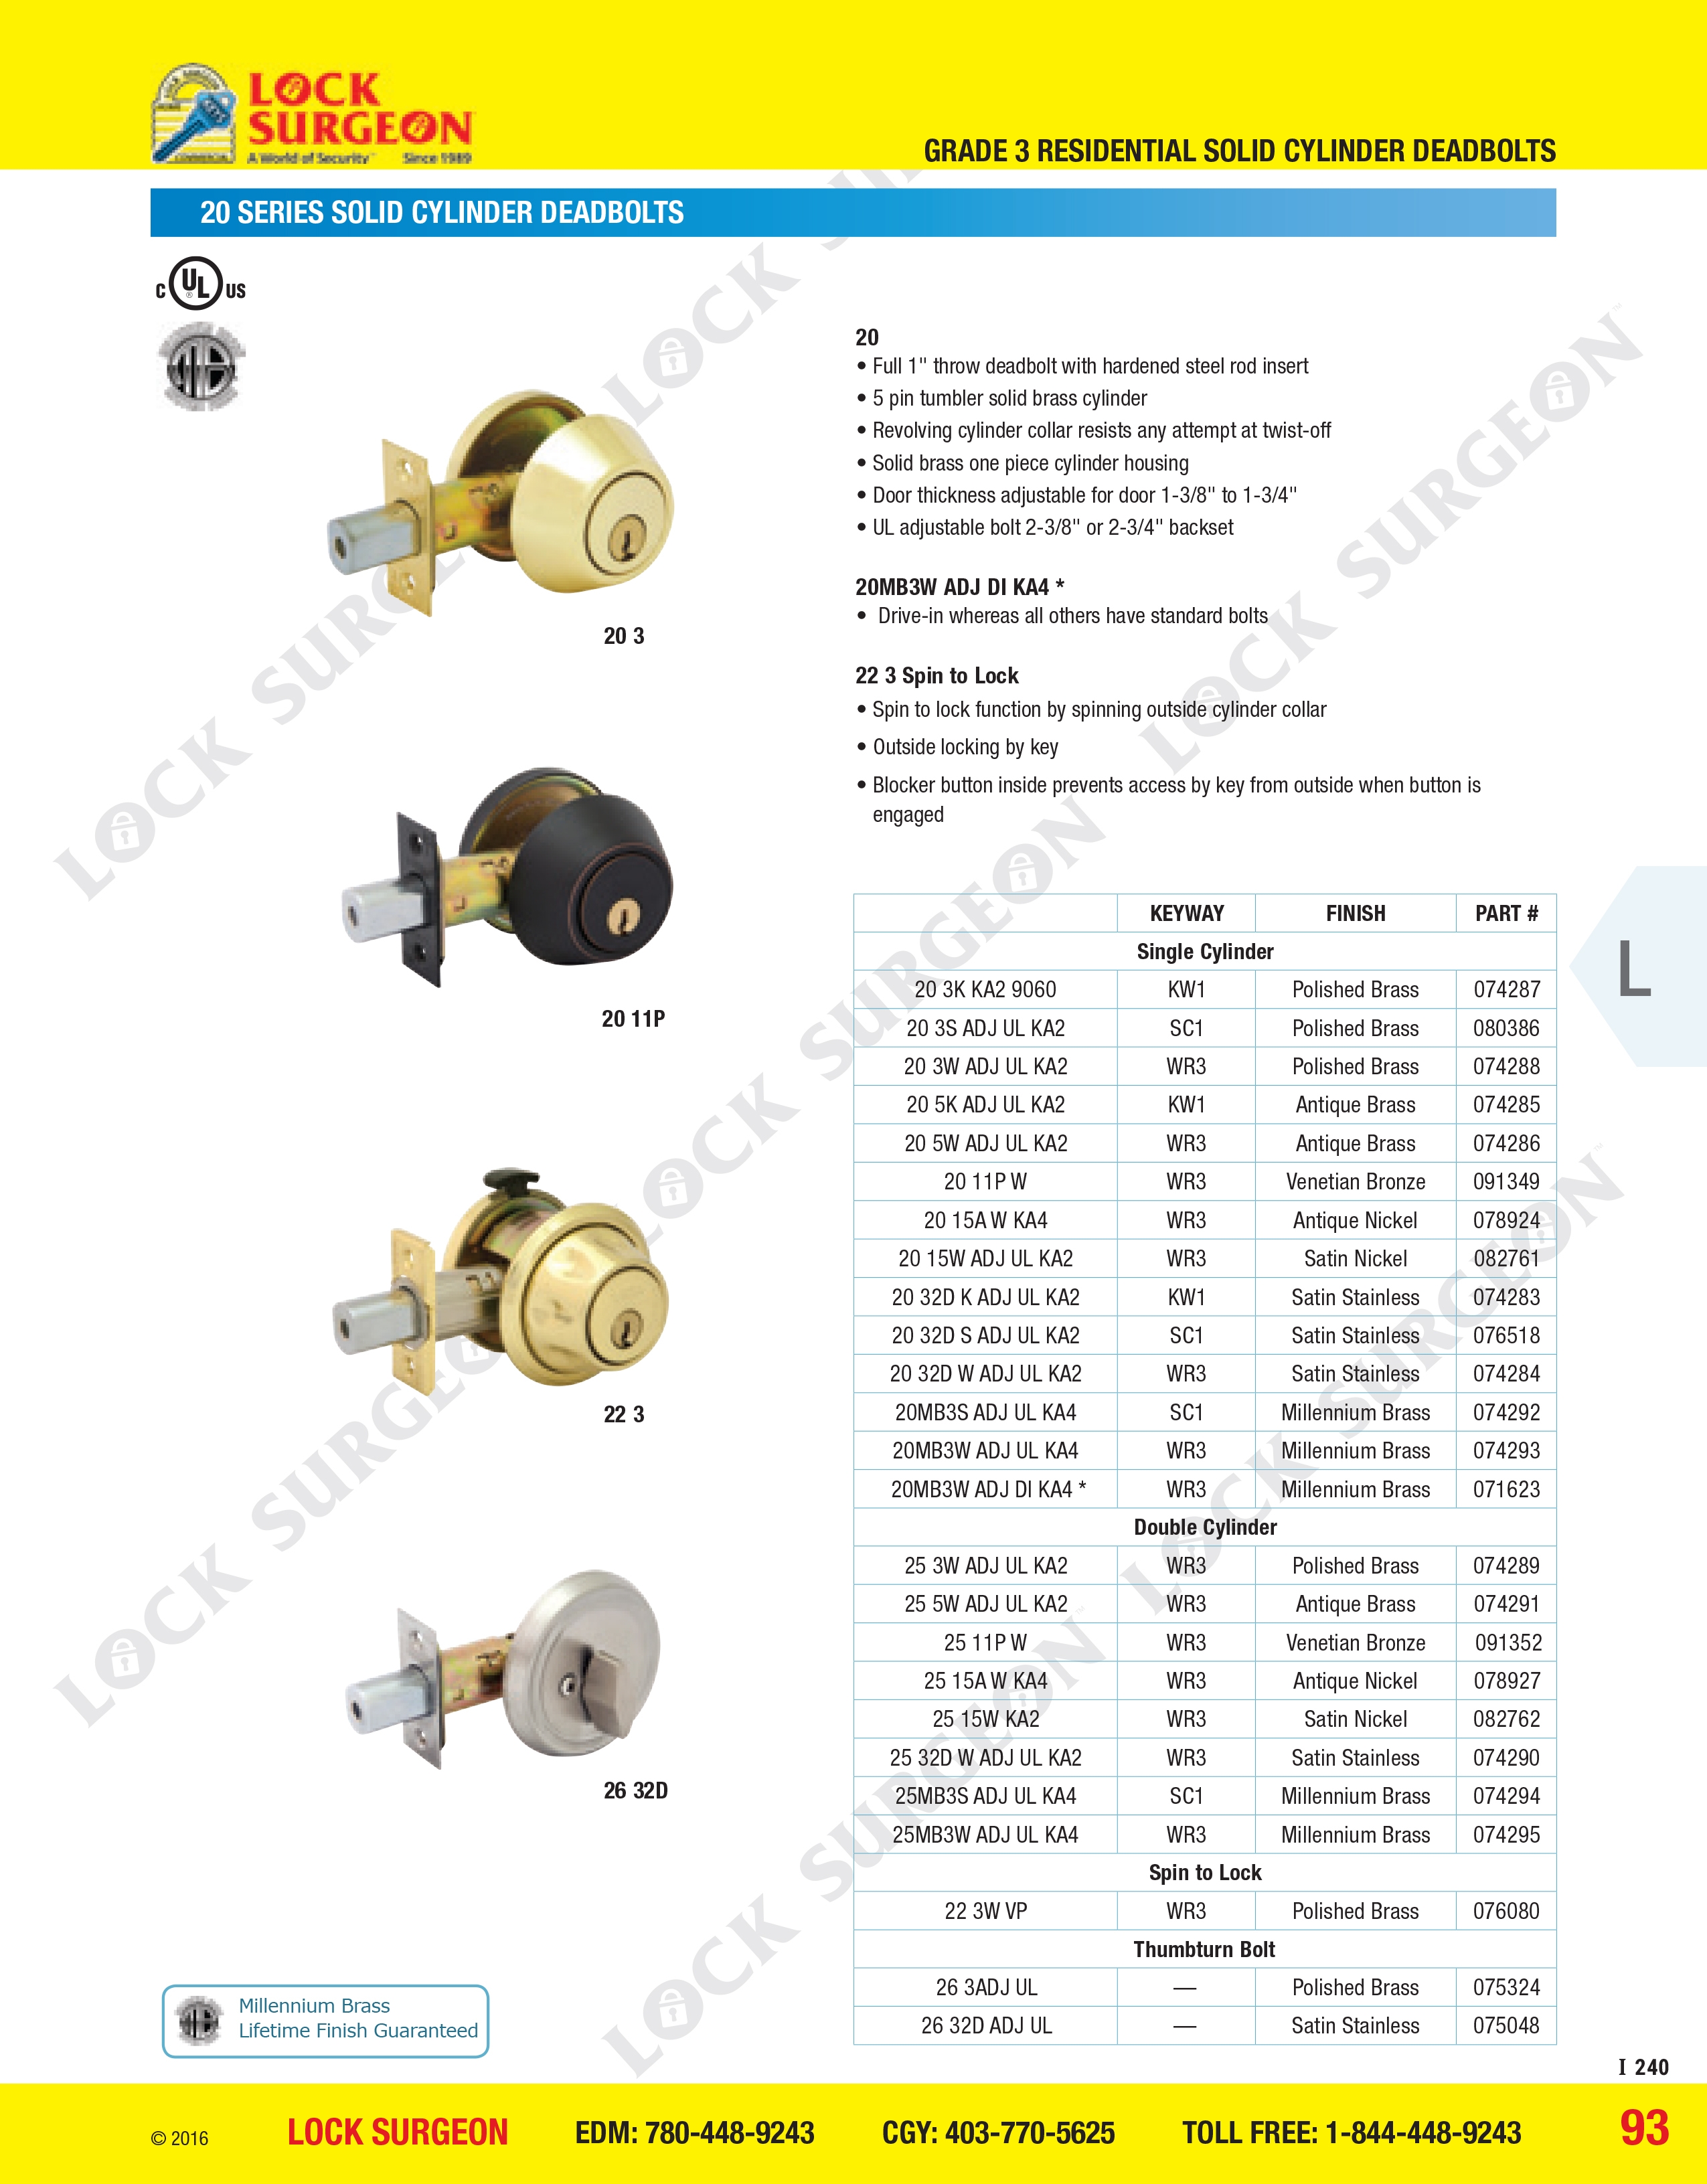 High grade deadbolts single-sided cylinder or double-sided cylinder.